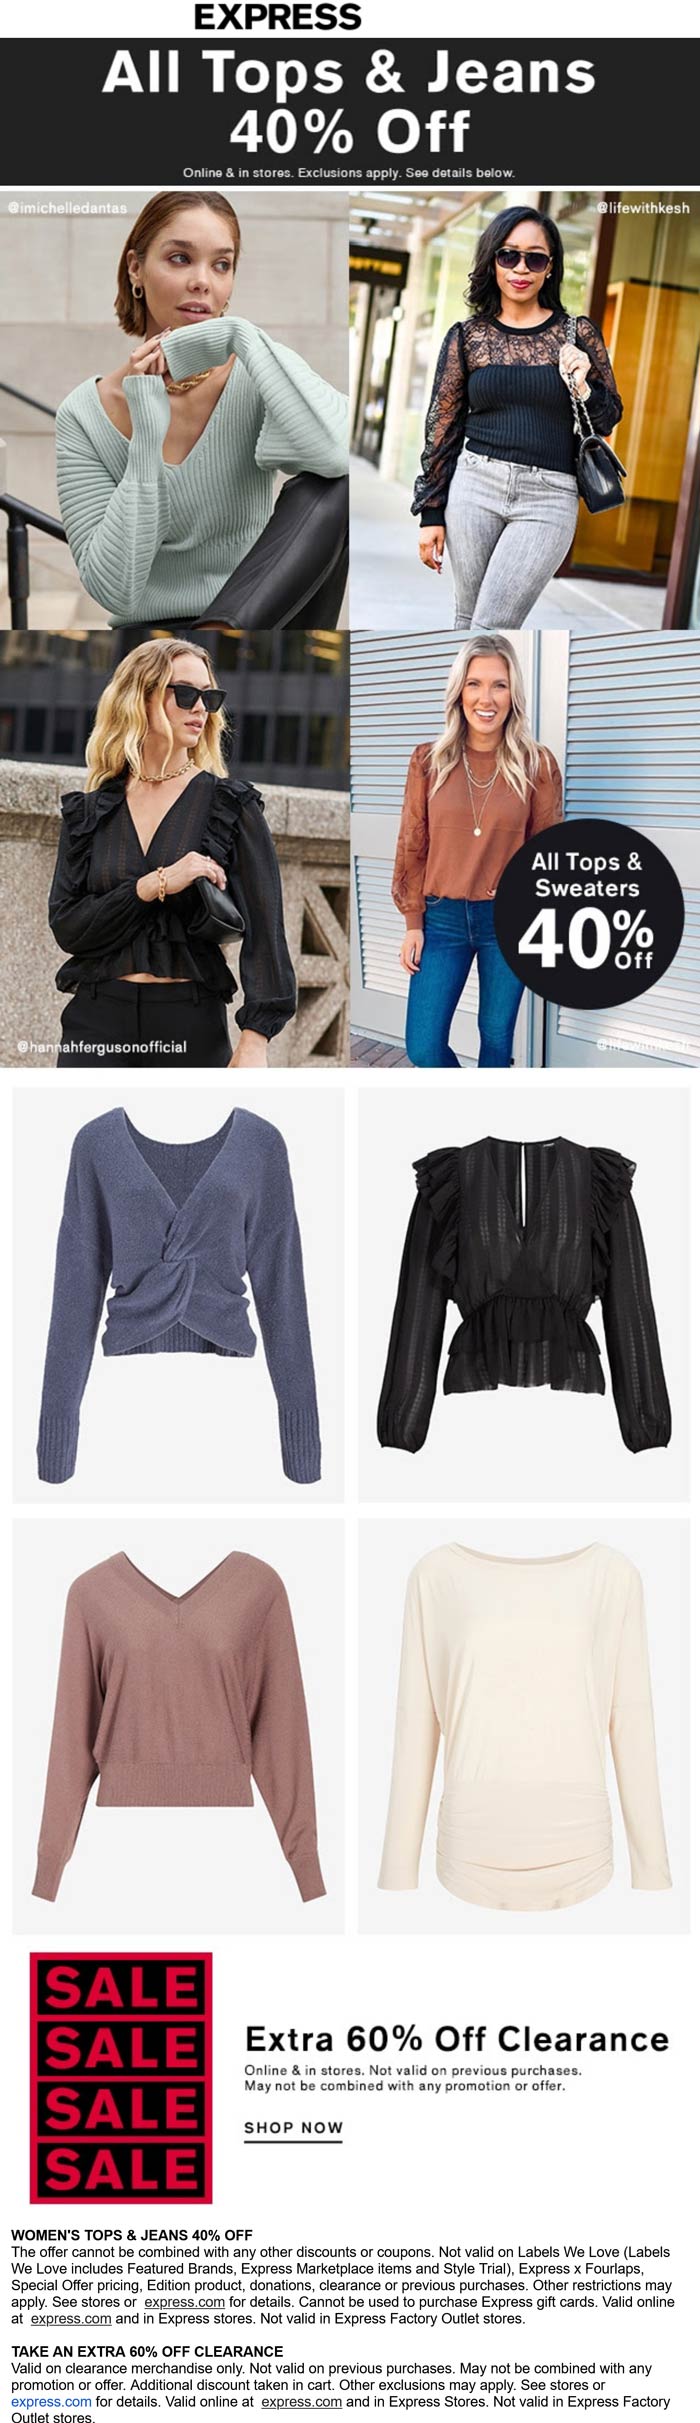 Express stores Coupon  40% off all tops & jeans at Express, ditto online #express 